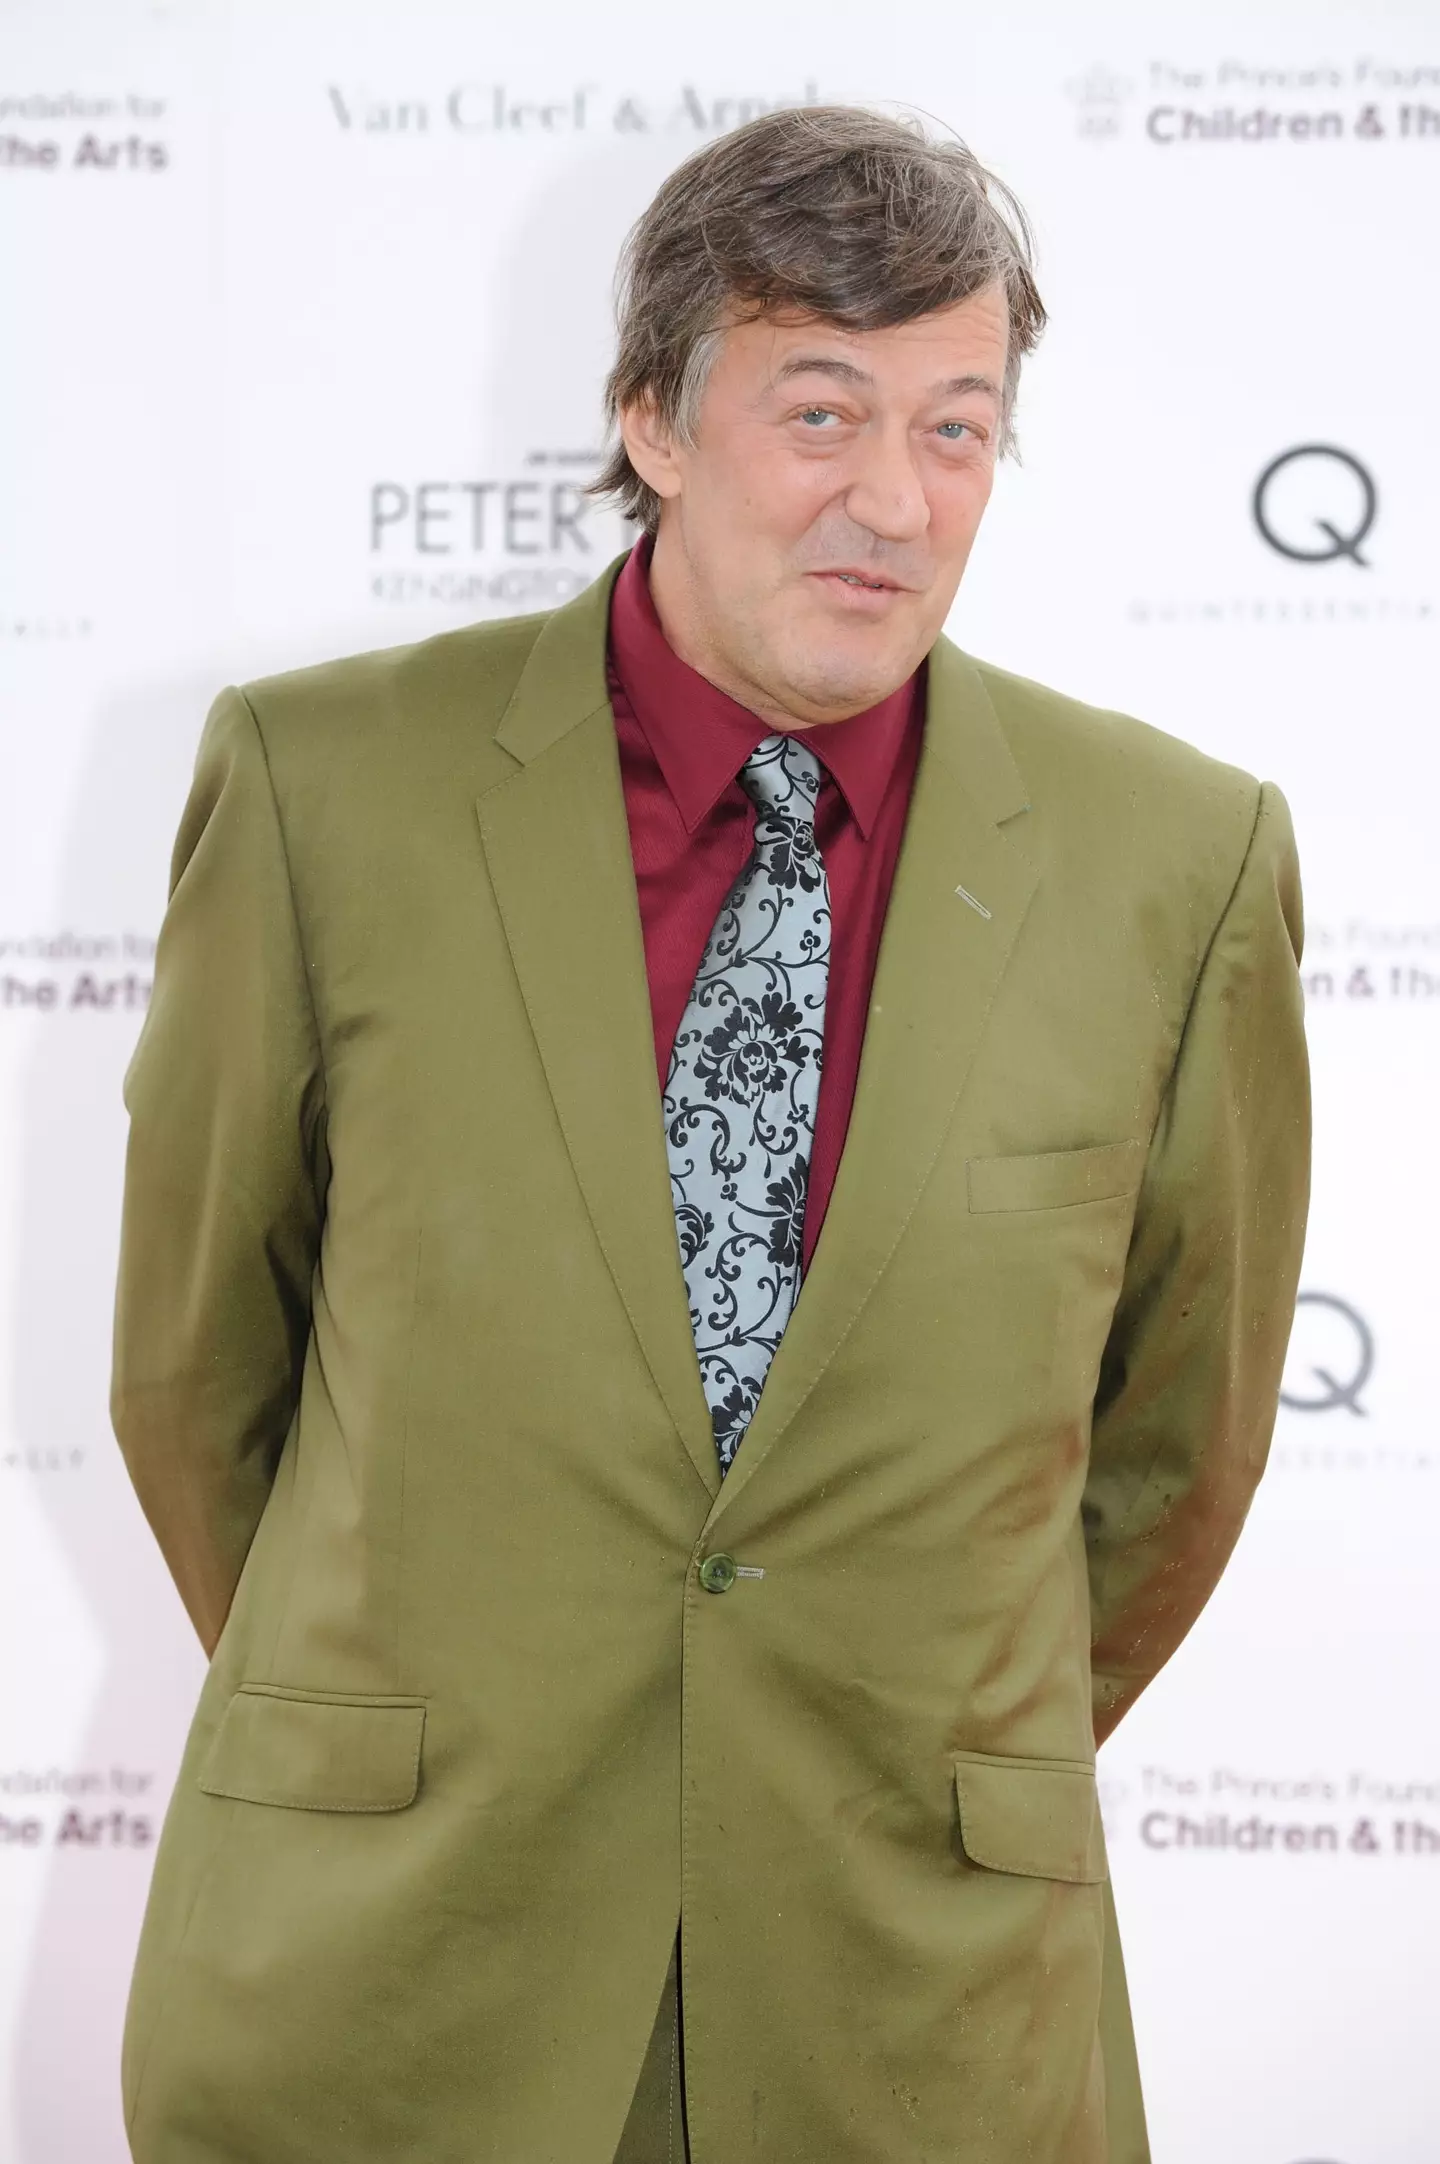 An unearthed interview saw Stephen Fry taking a swipe at women who supposedly don’t like sex as much as straight men.